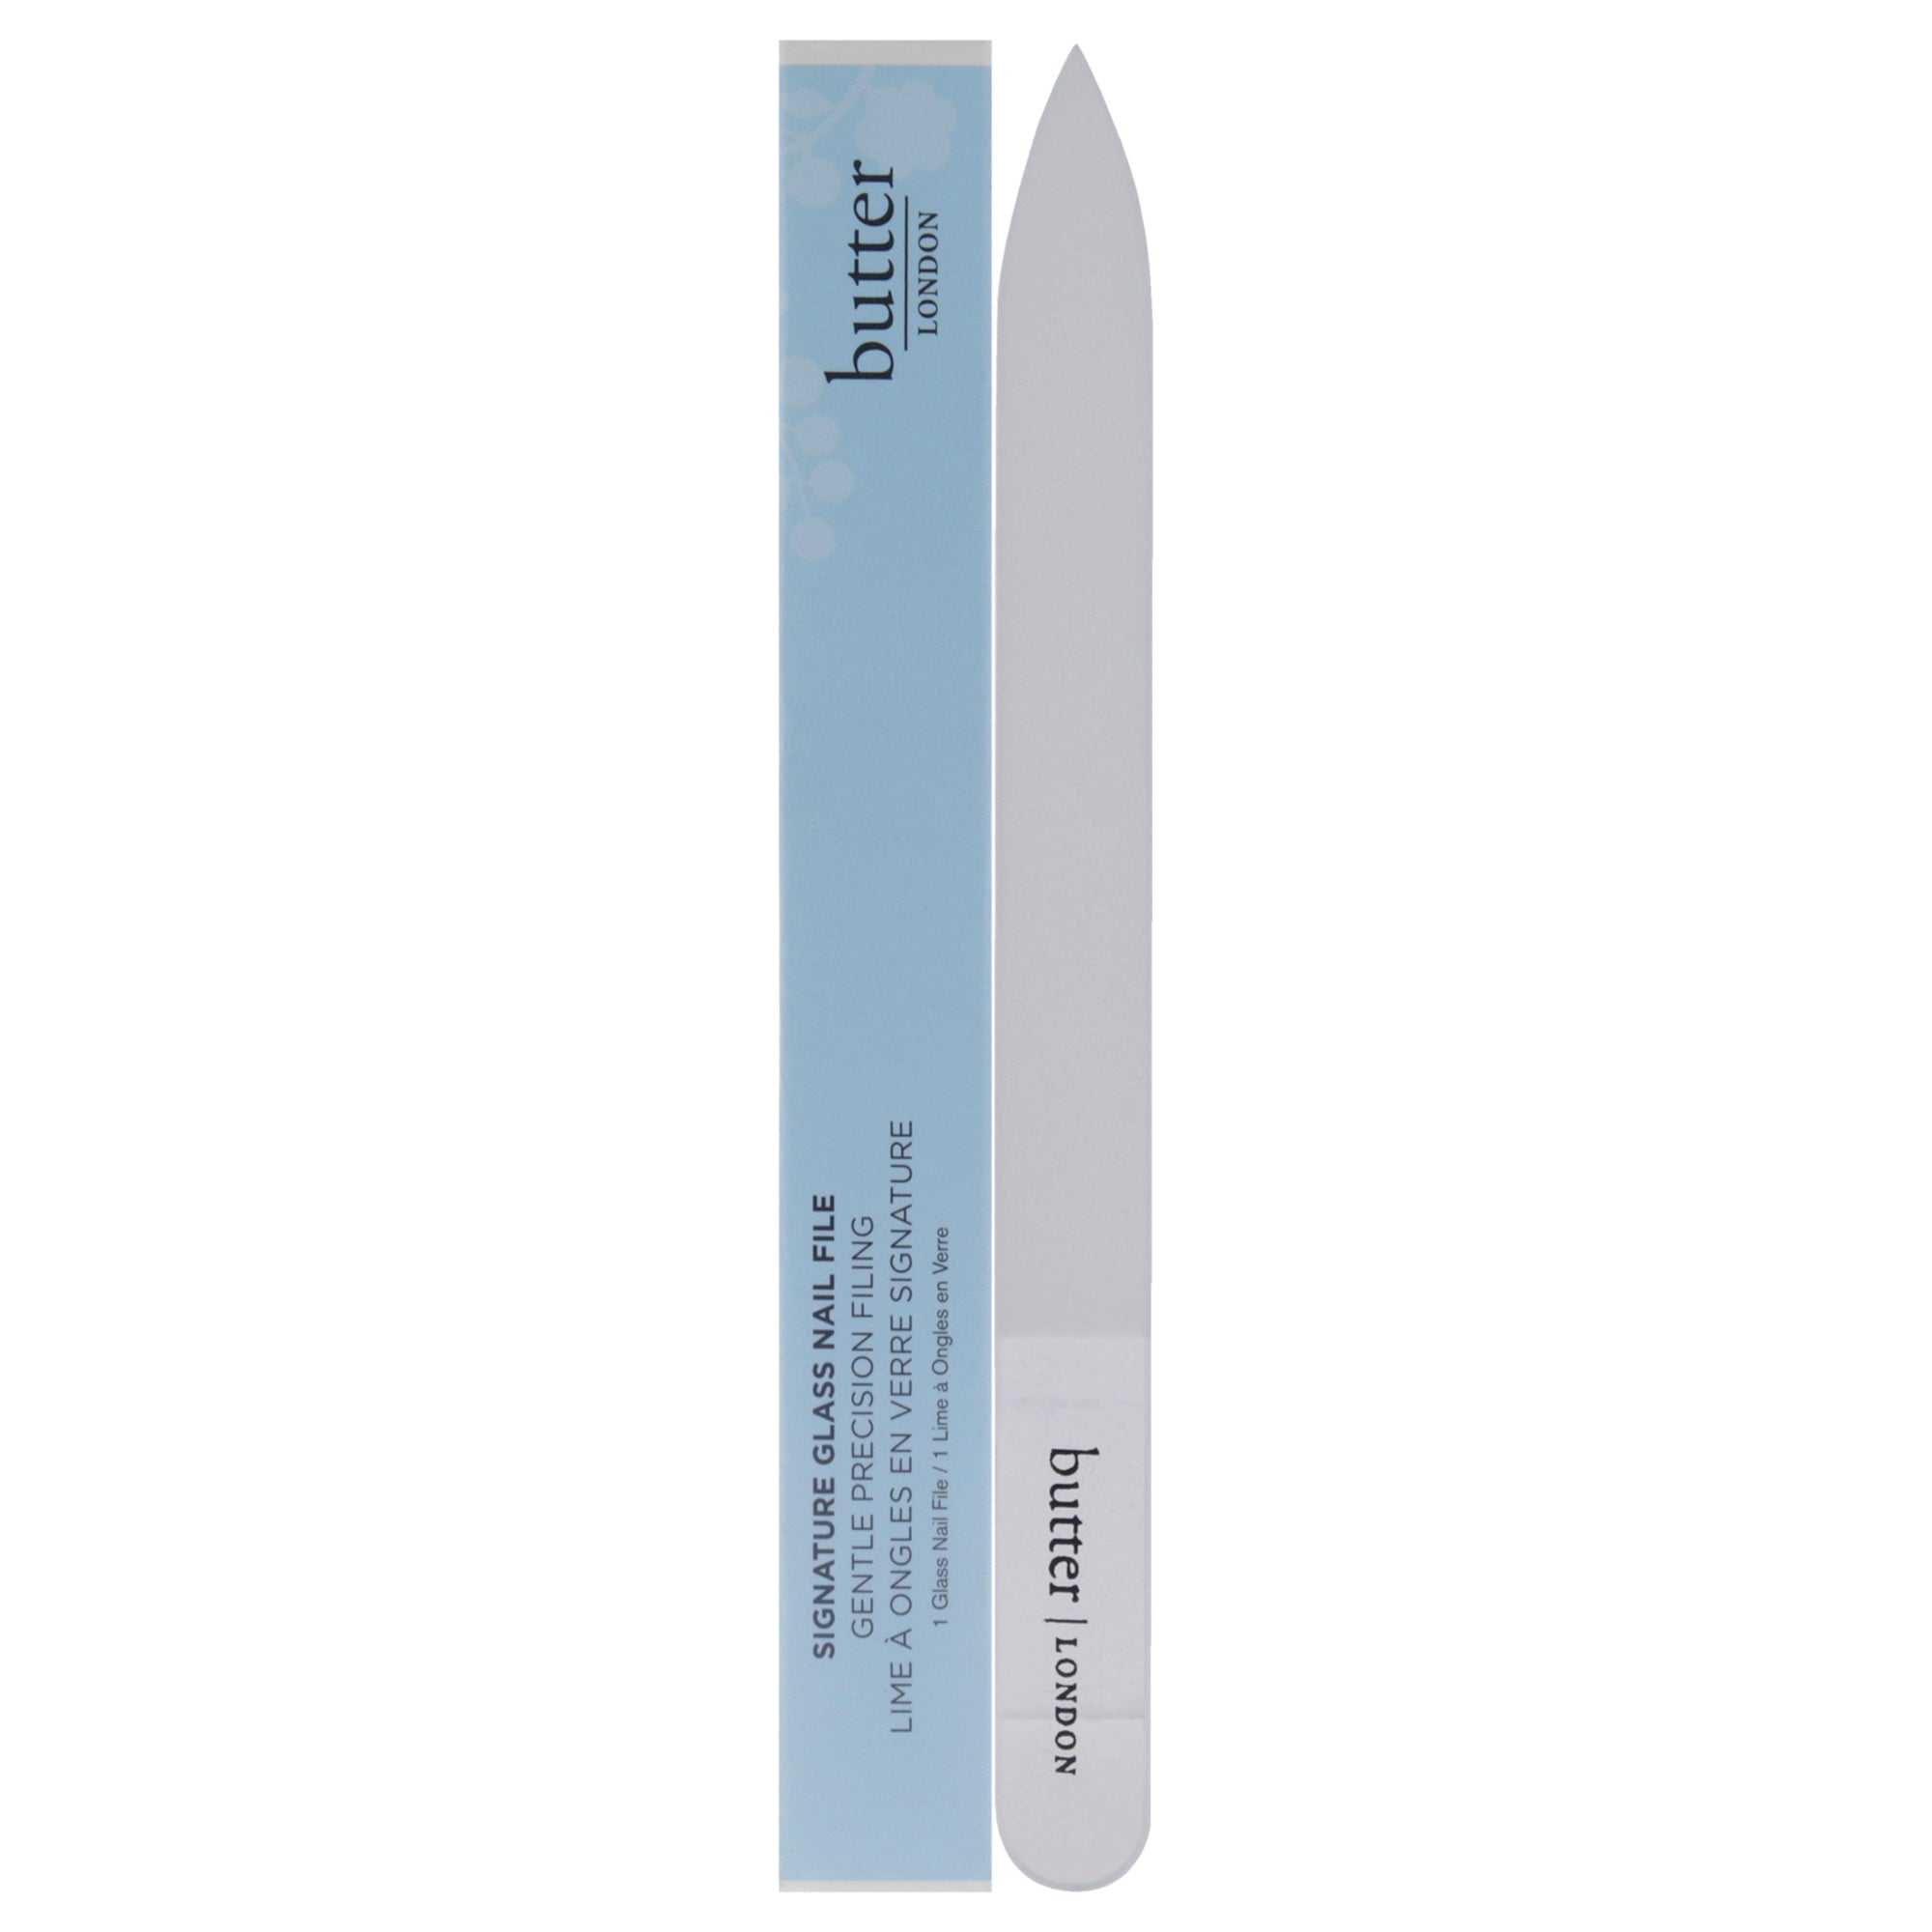 Signature Glass Nail File by Butter London for Women - 1 Pc Nail File